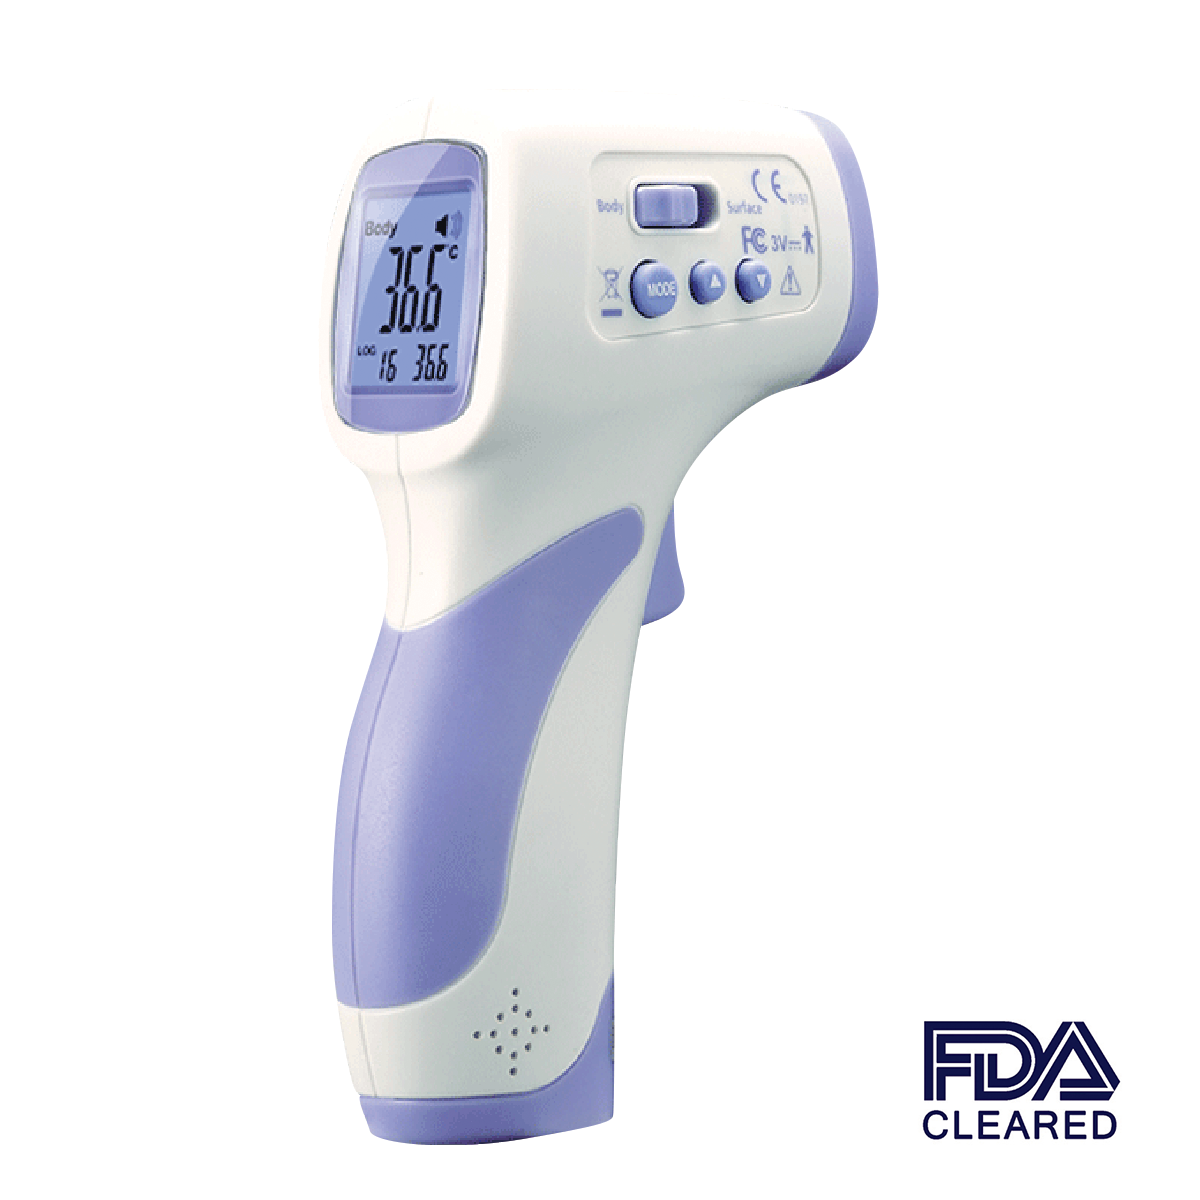 How to Choose the best Infrared Thermometer in Canada this COVID-19